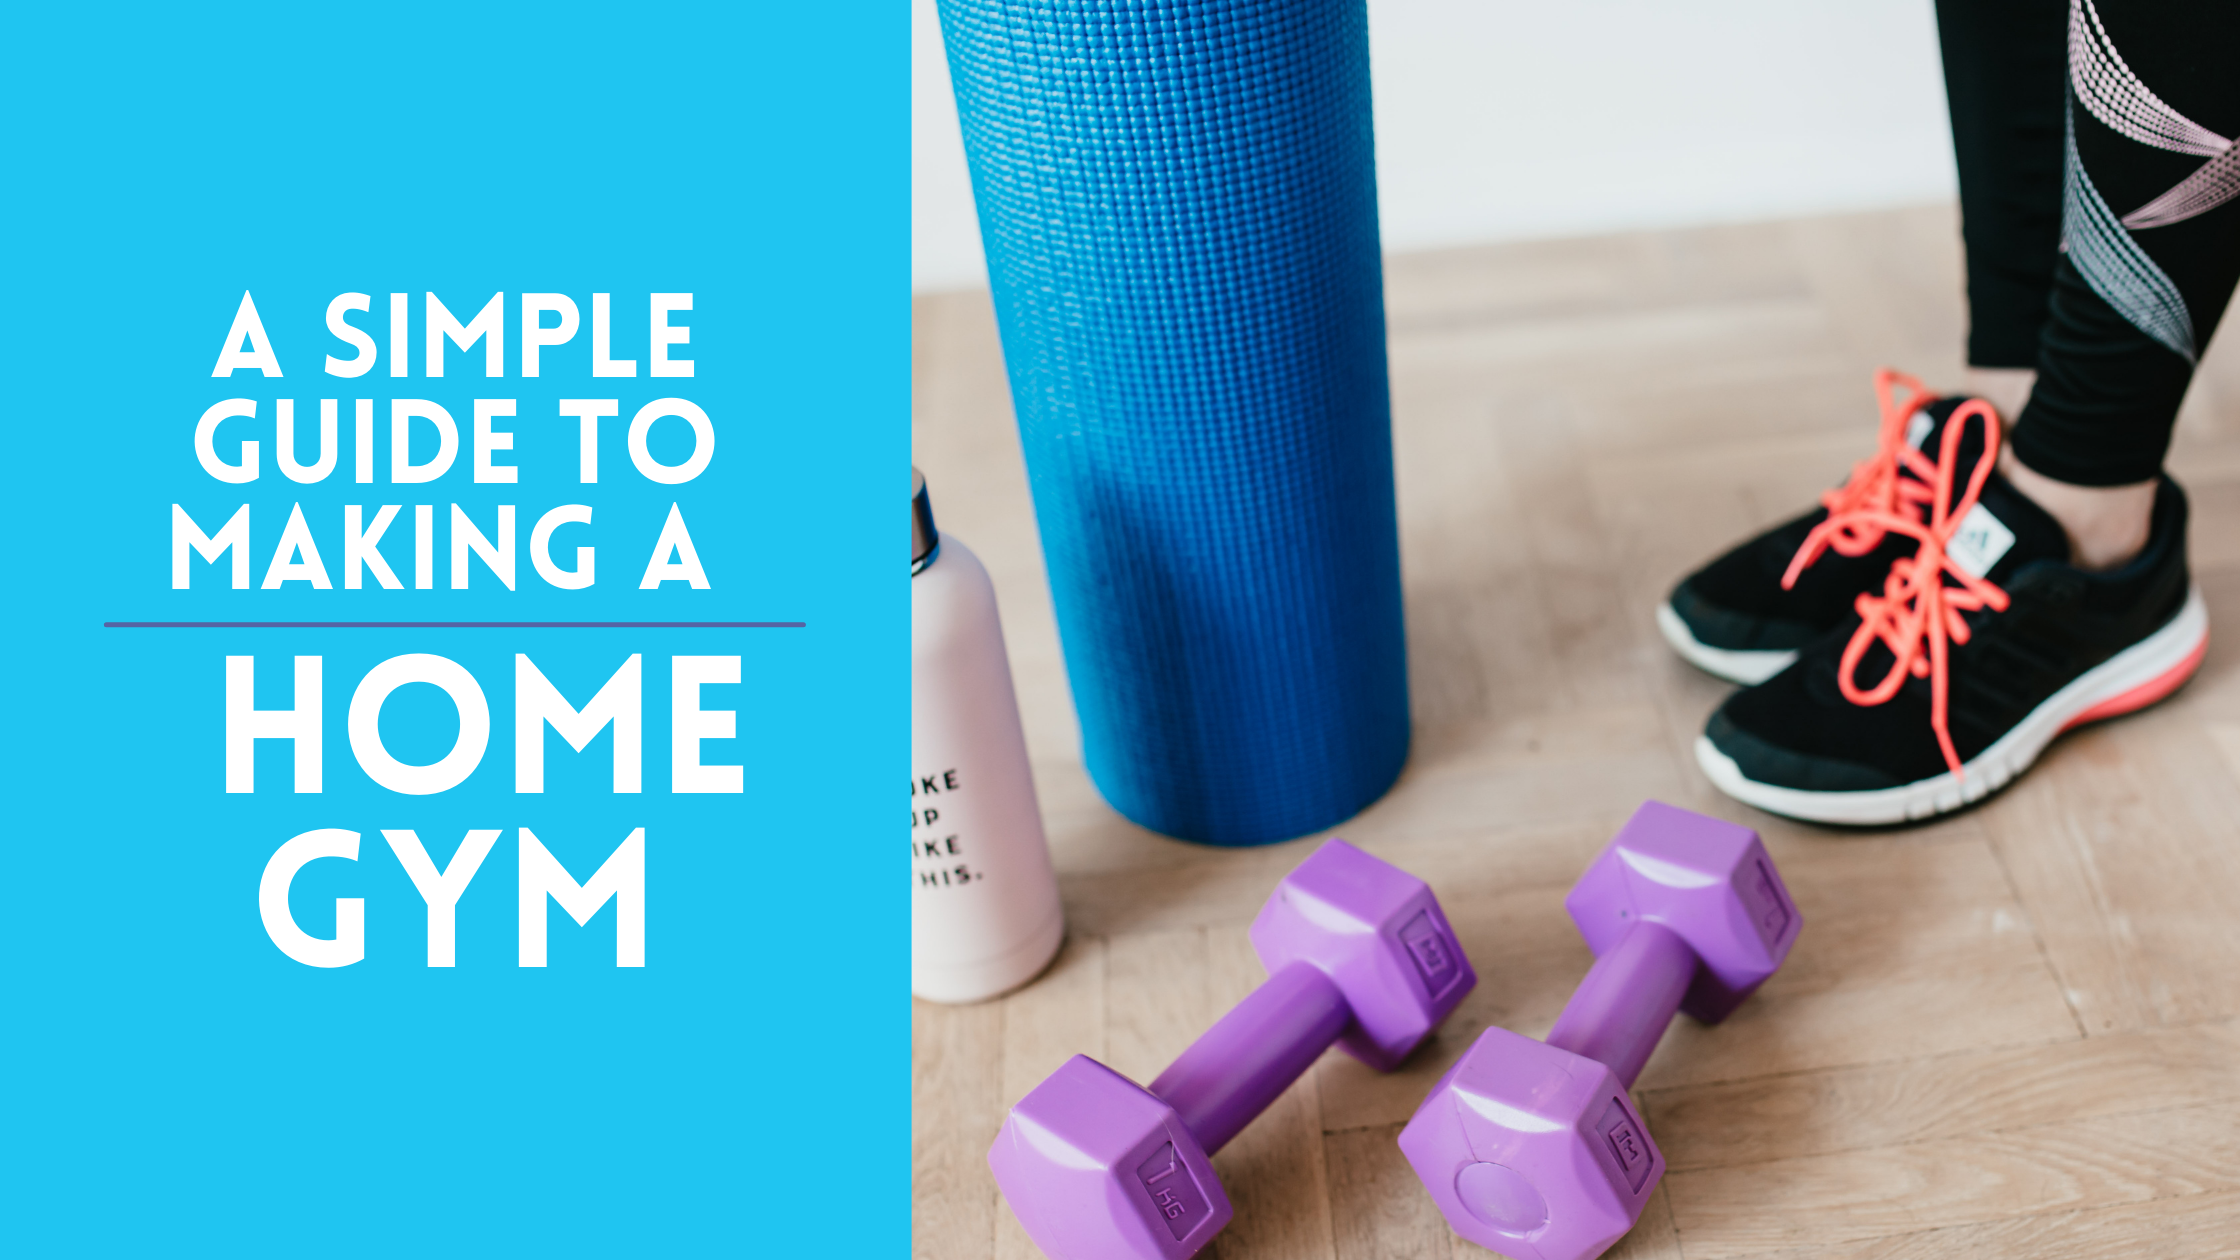 A Simple Guide to Making a Home Gym